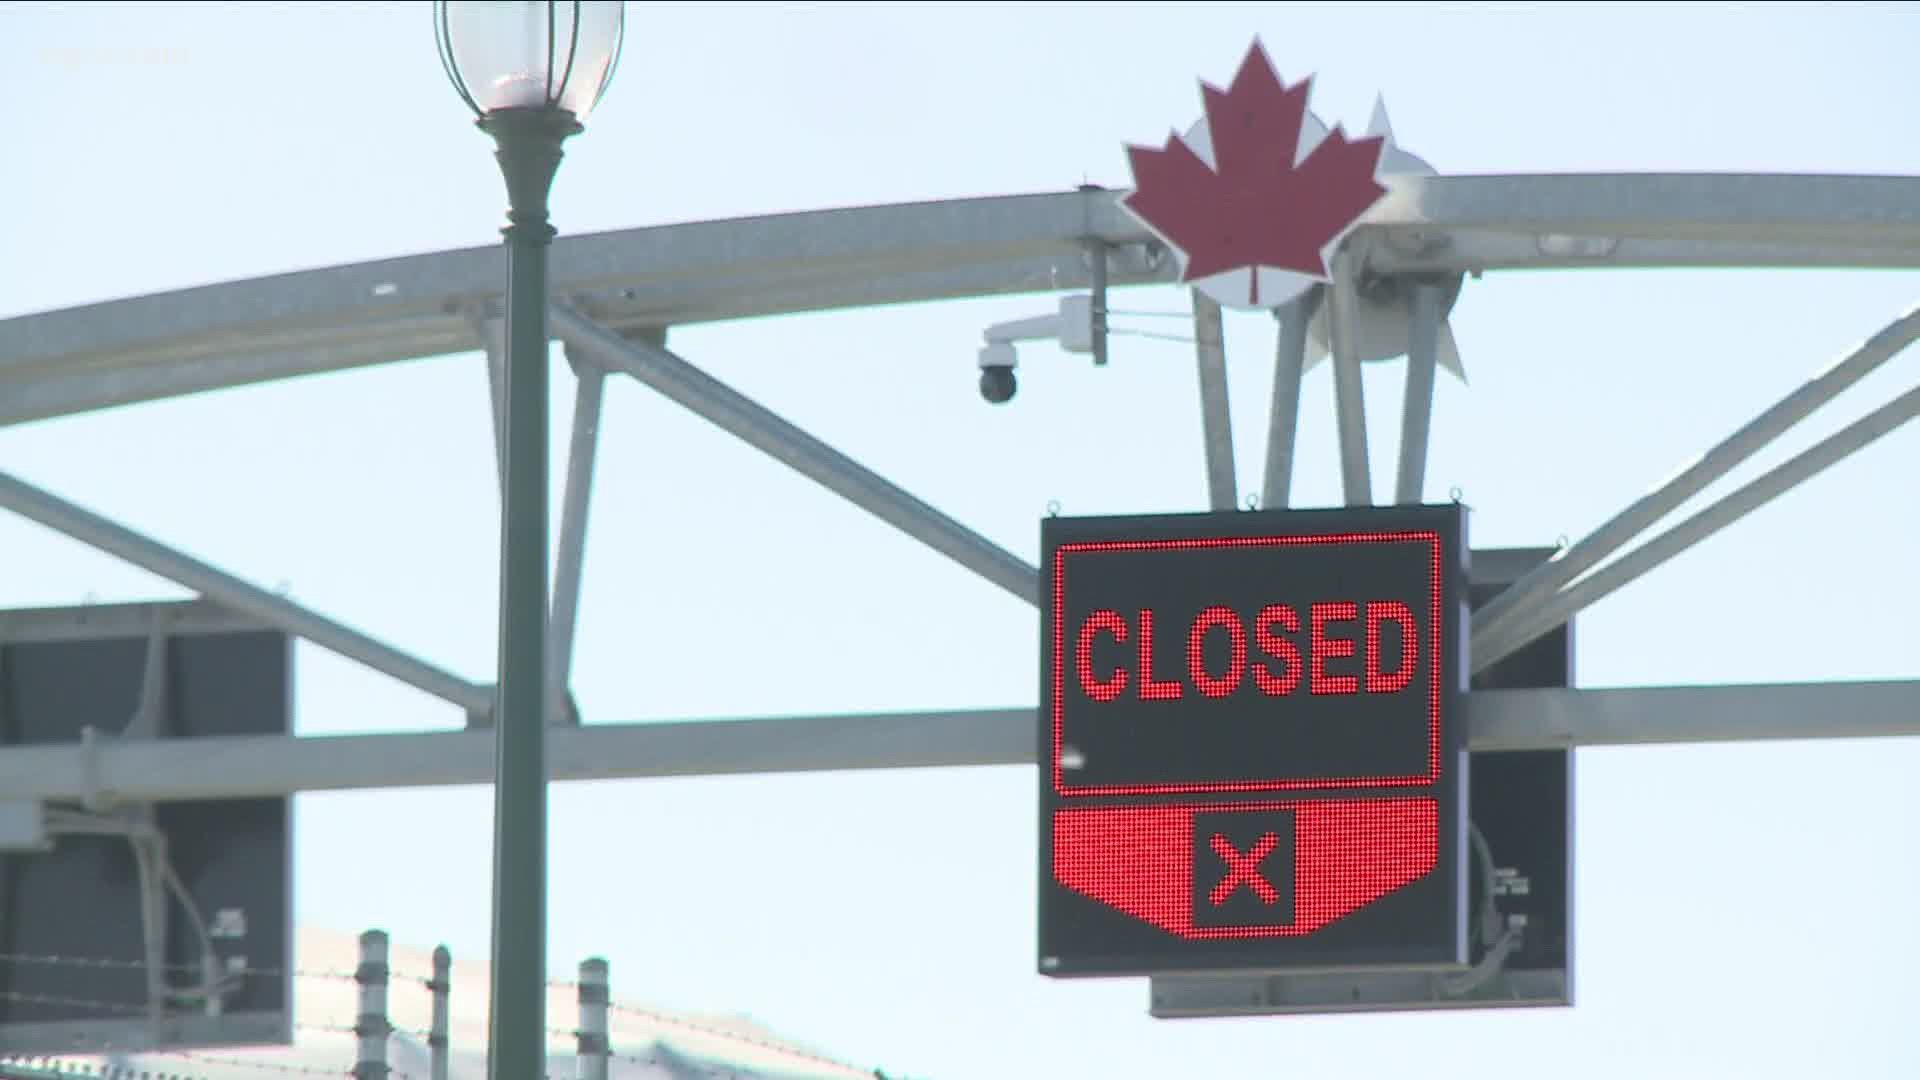 The U.S and Canada agreed to extend its border restrictions until late July. This not only impacts people with property over there, but also could impact the locals.